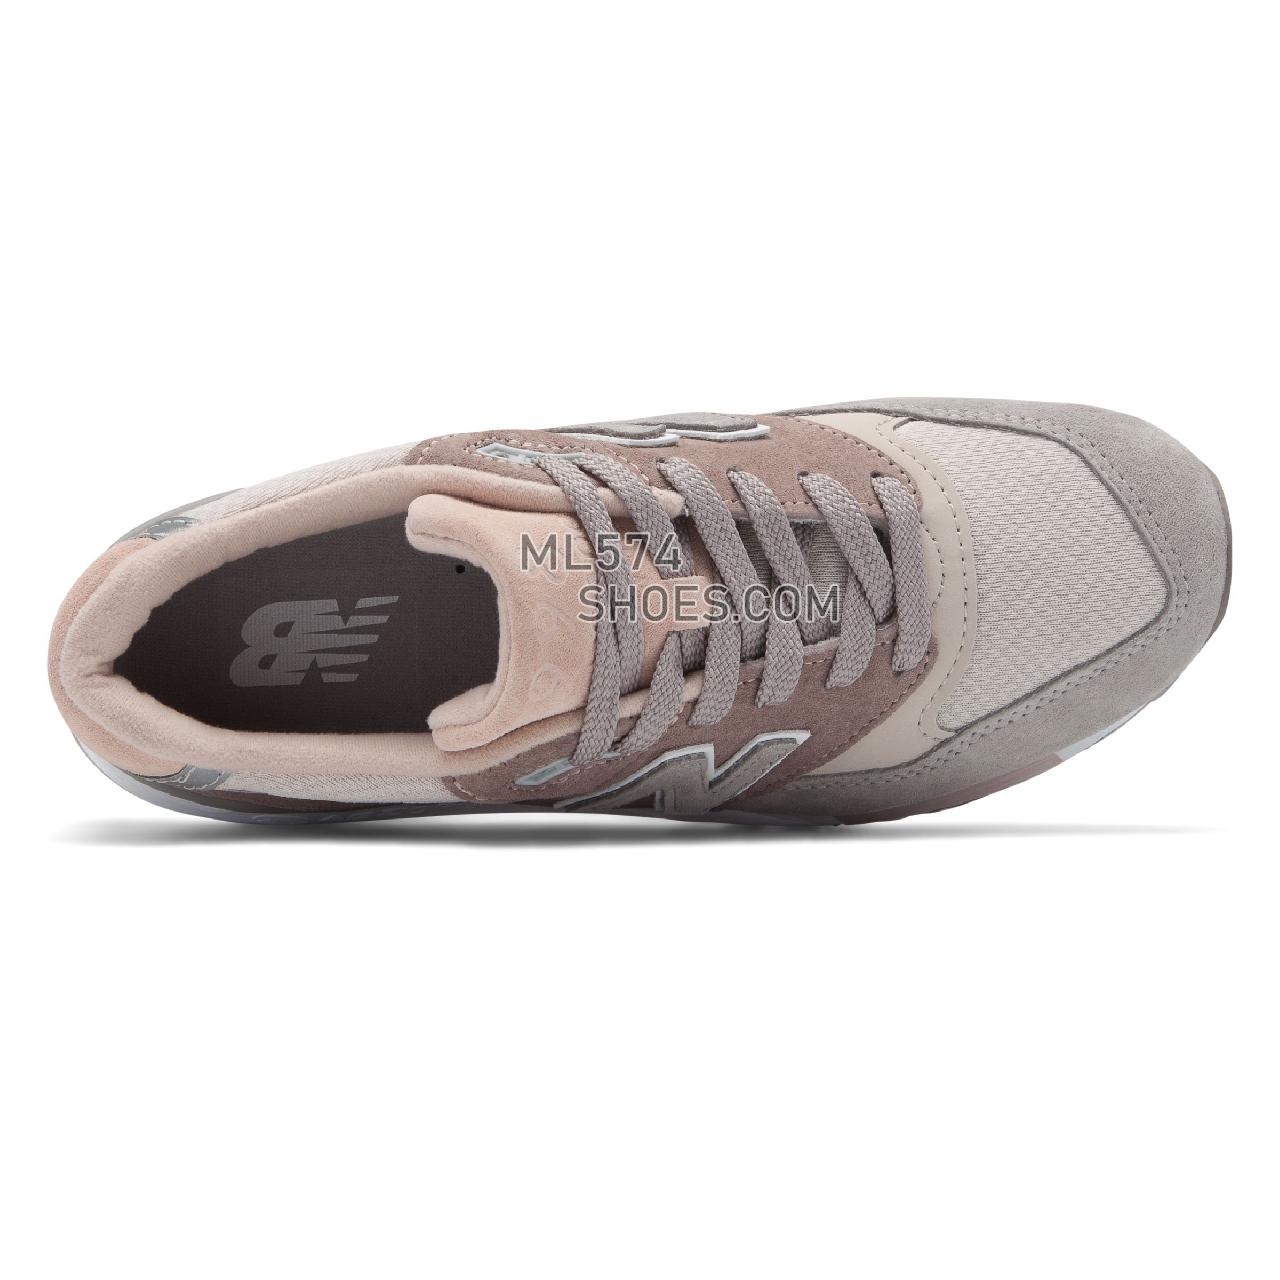 New Balance Made in US 998 - Men's 998 Made in US Classic W998-PM - Grey with White - W998AWA